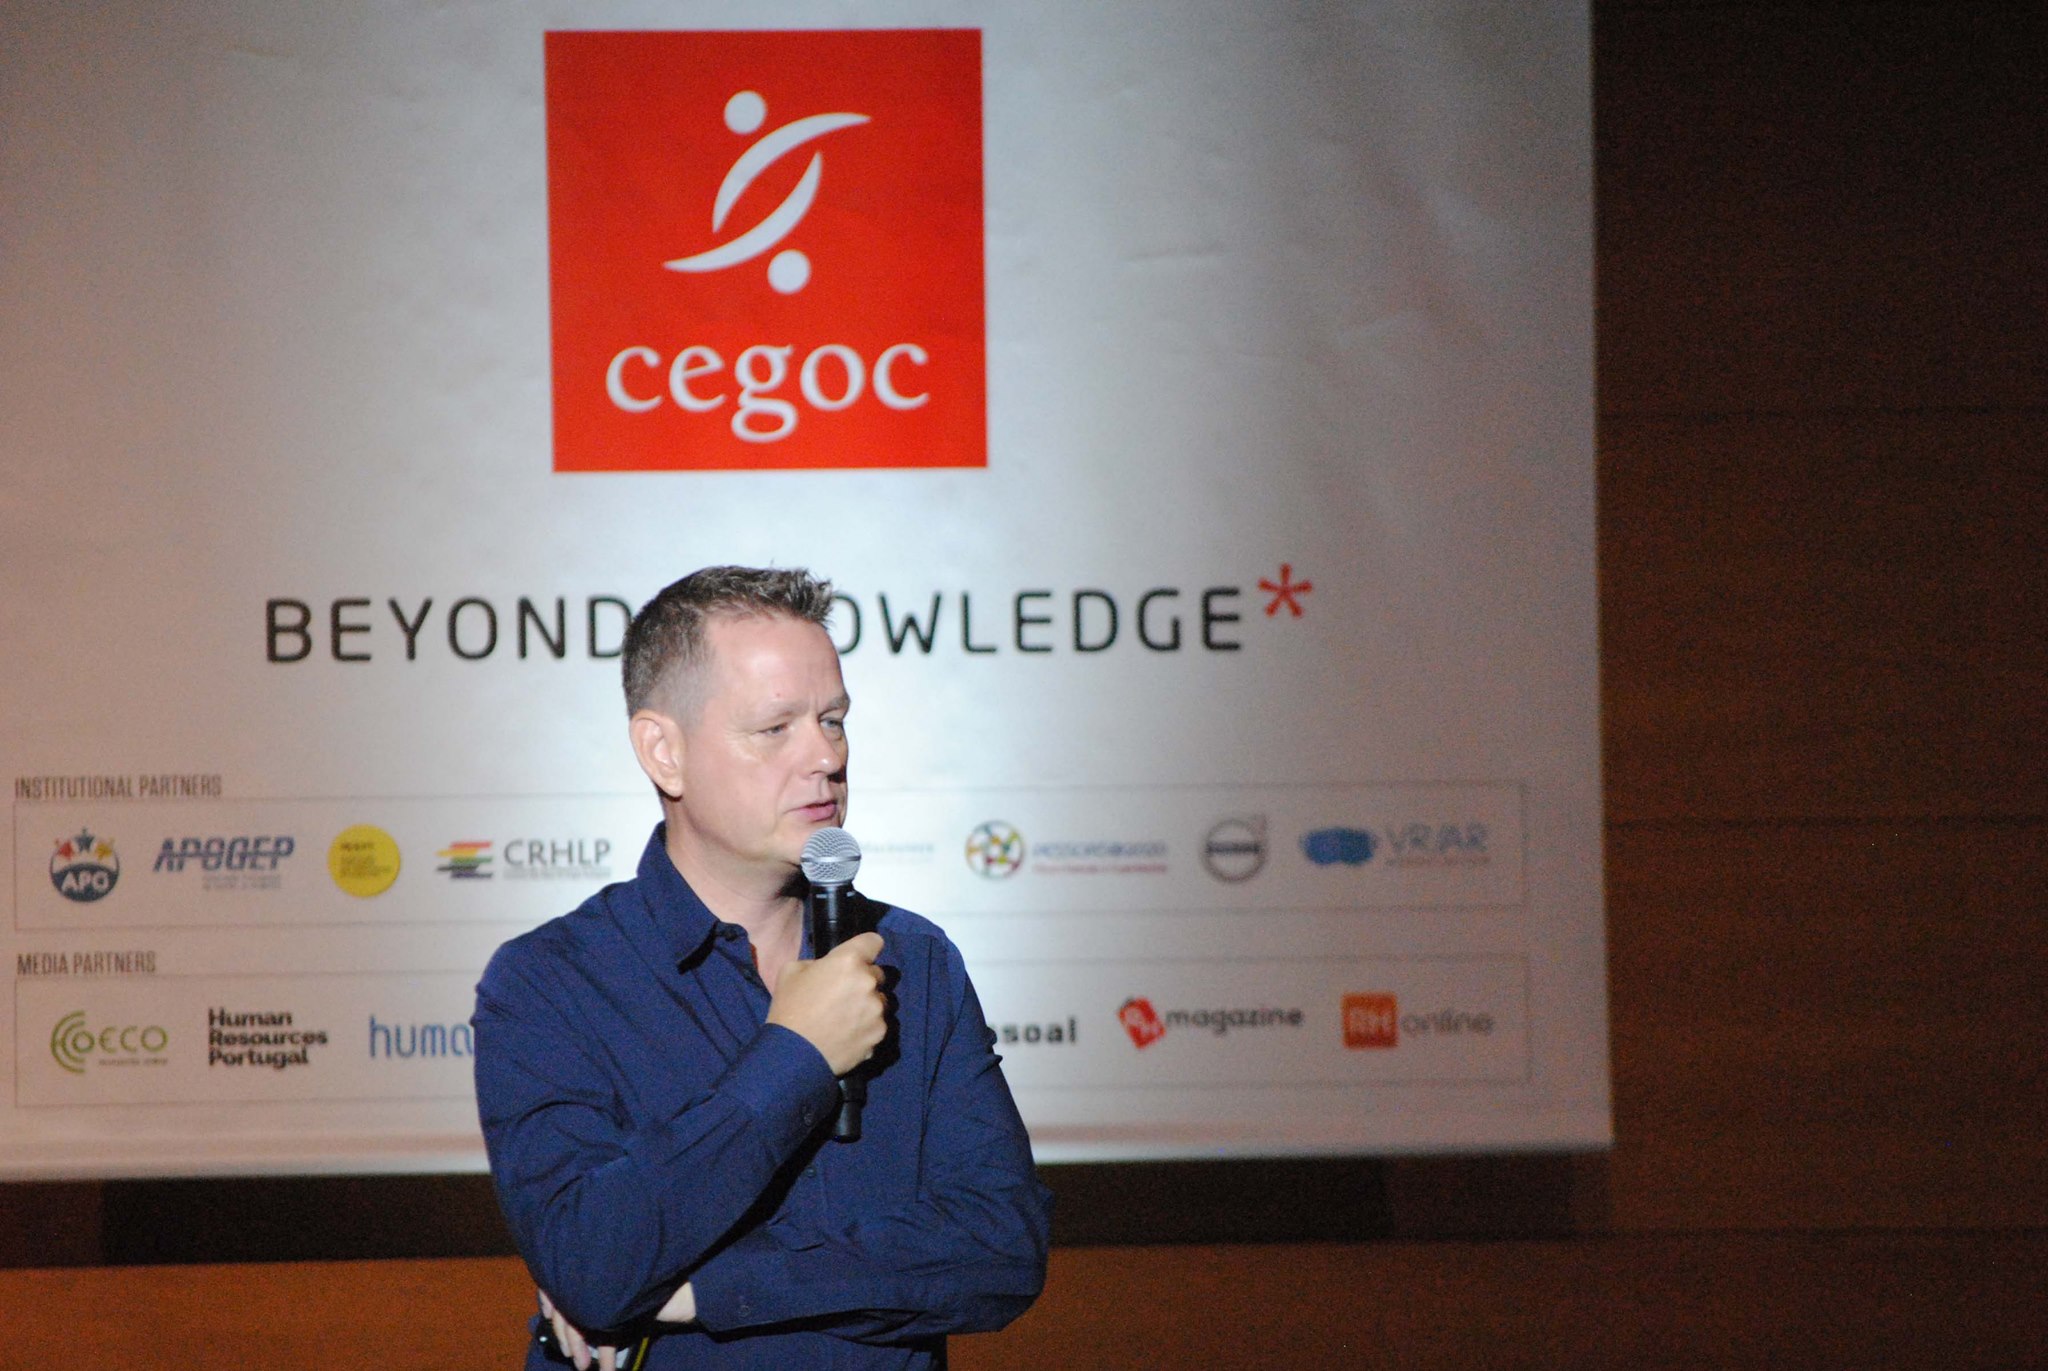 Picture: Martin Londstrom, Brand Futurist, at the 2018 Business Transformation Summit organised by Cegos